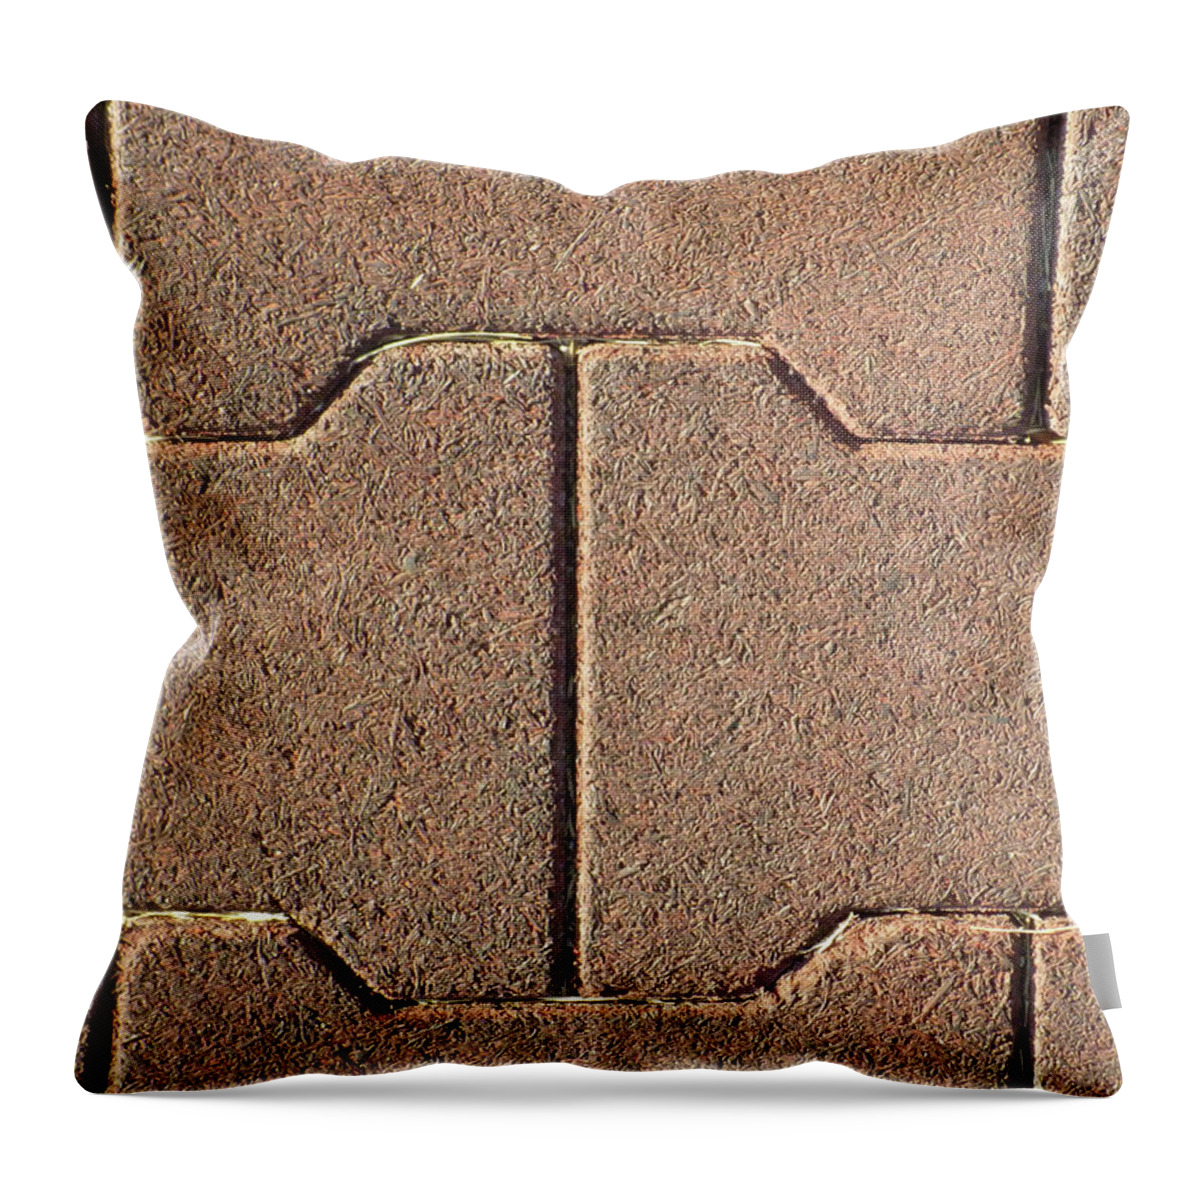 Keeneland Throw Pillow featuring the photograph Where Horses Tread by Mike McBrayer